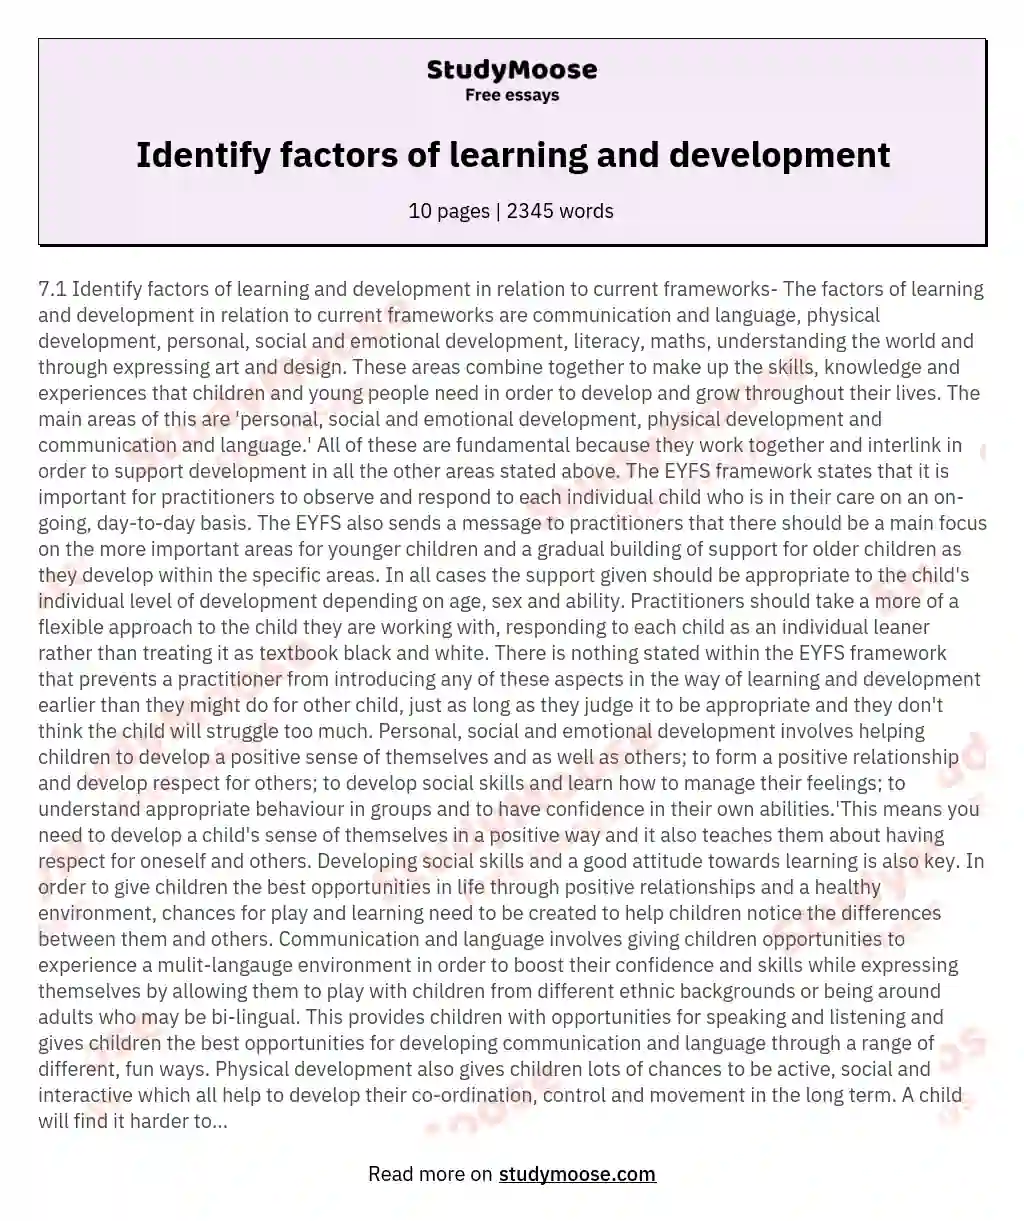 Identify factors of learning and development essay